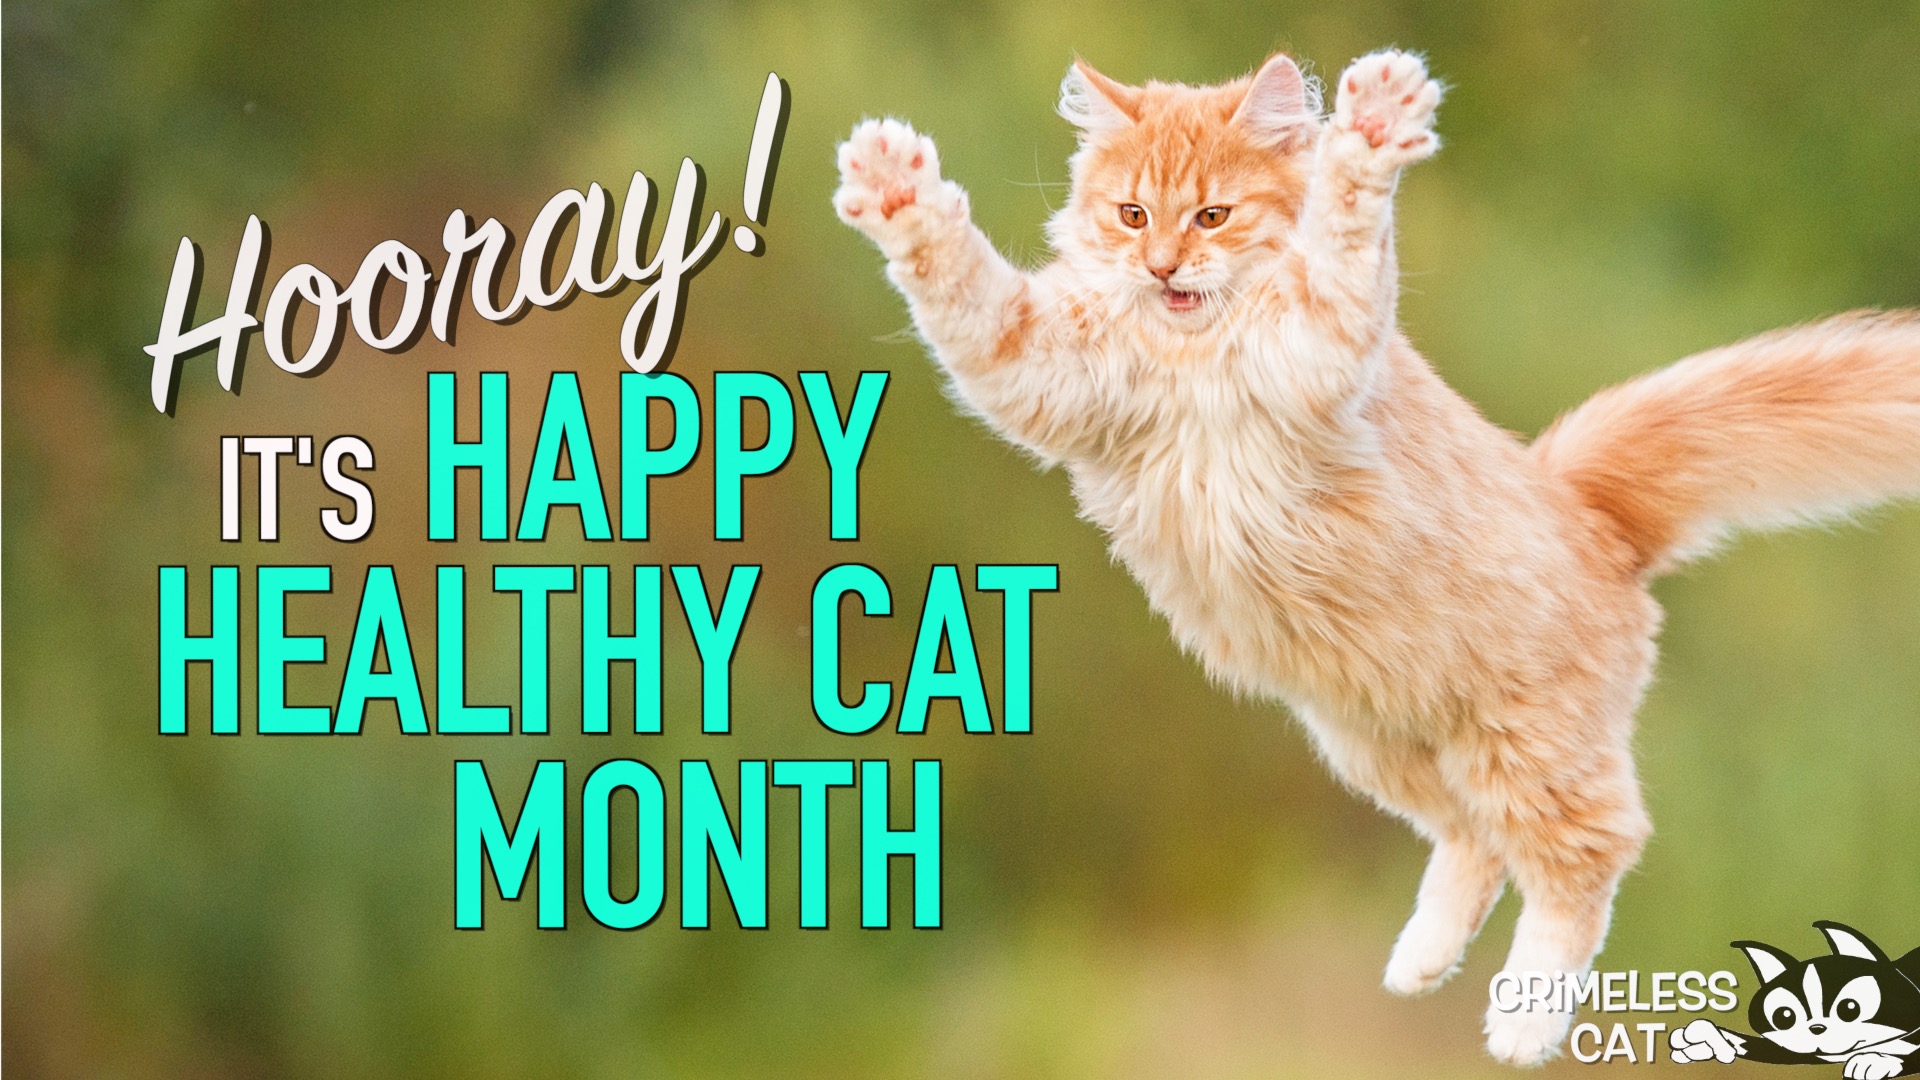 September is Happy, Healthy Cat Month